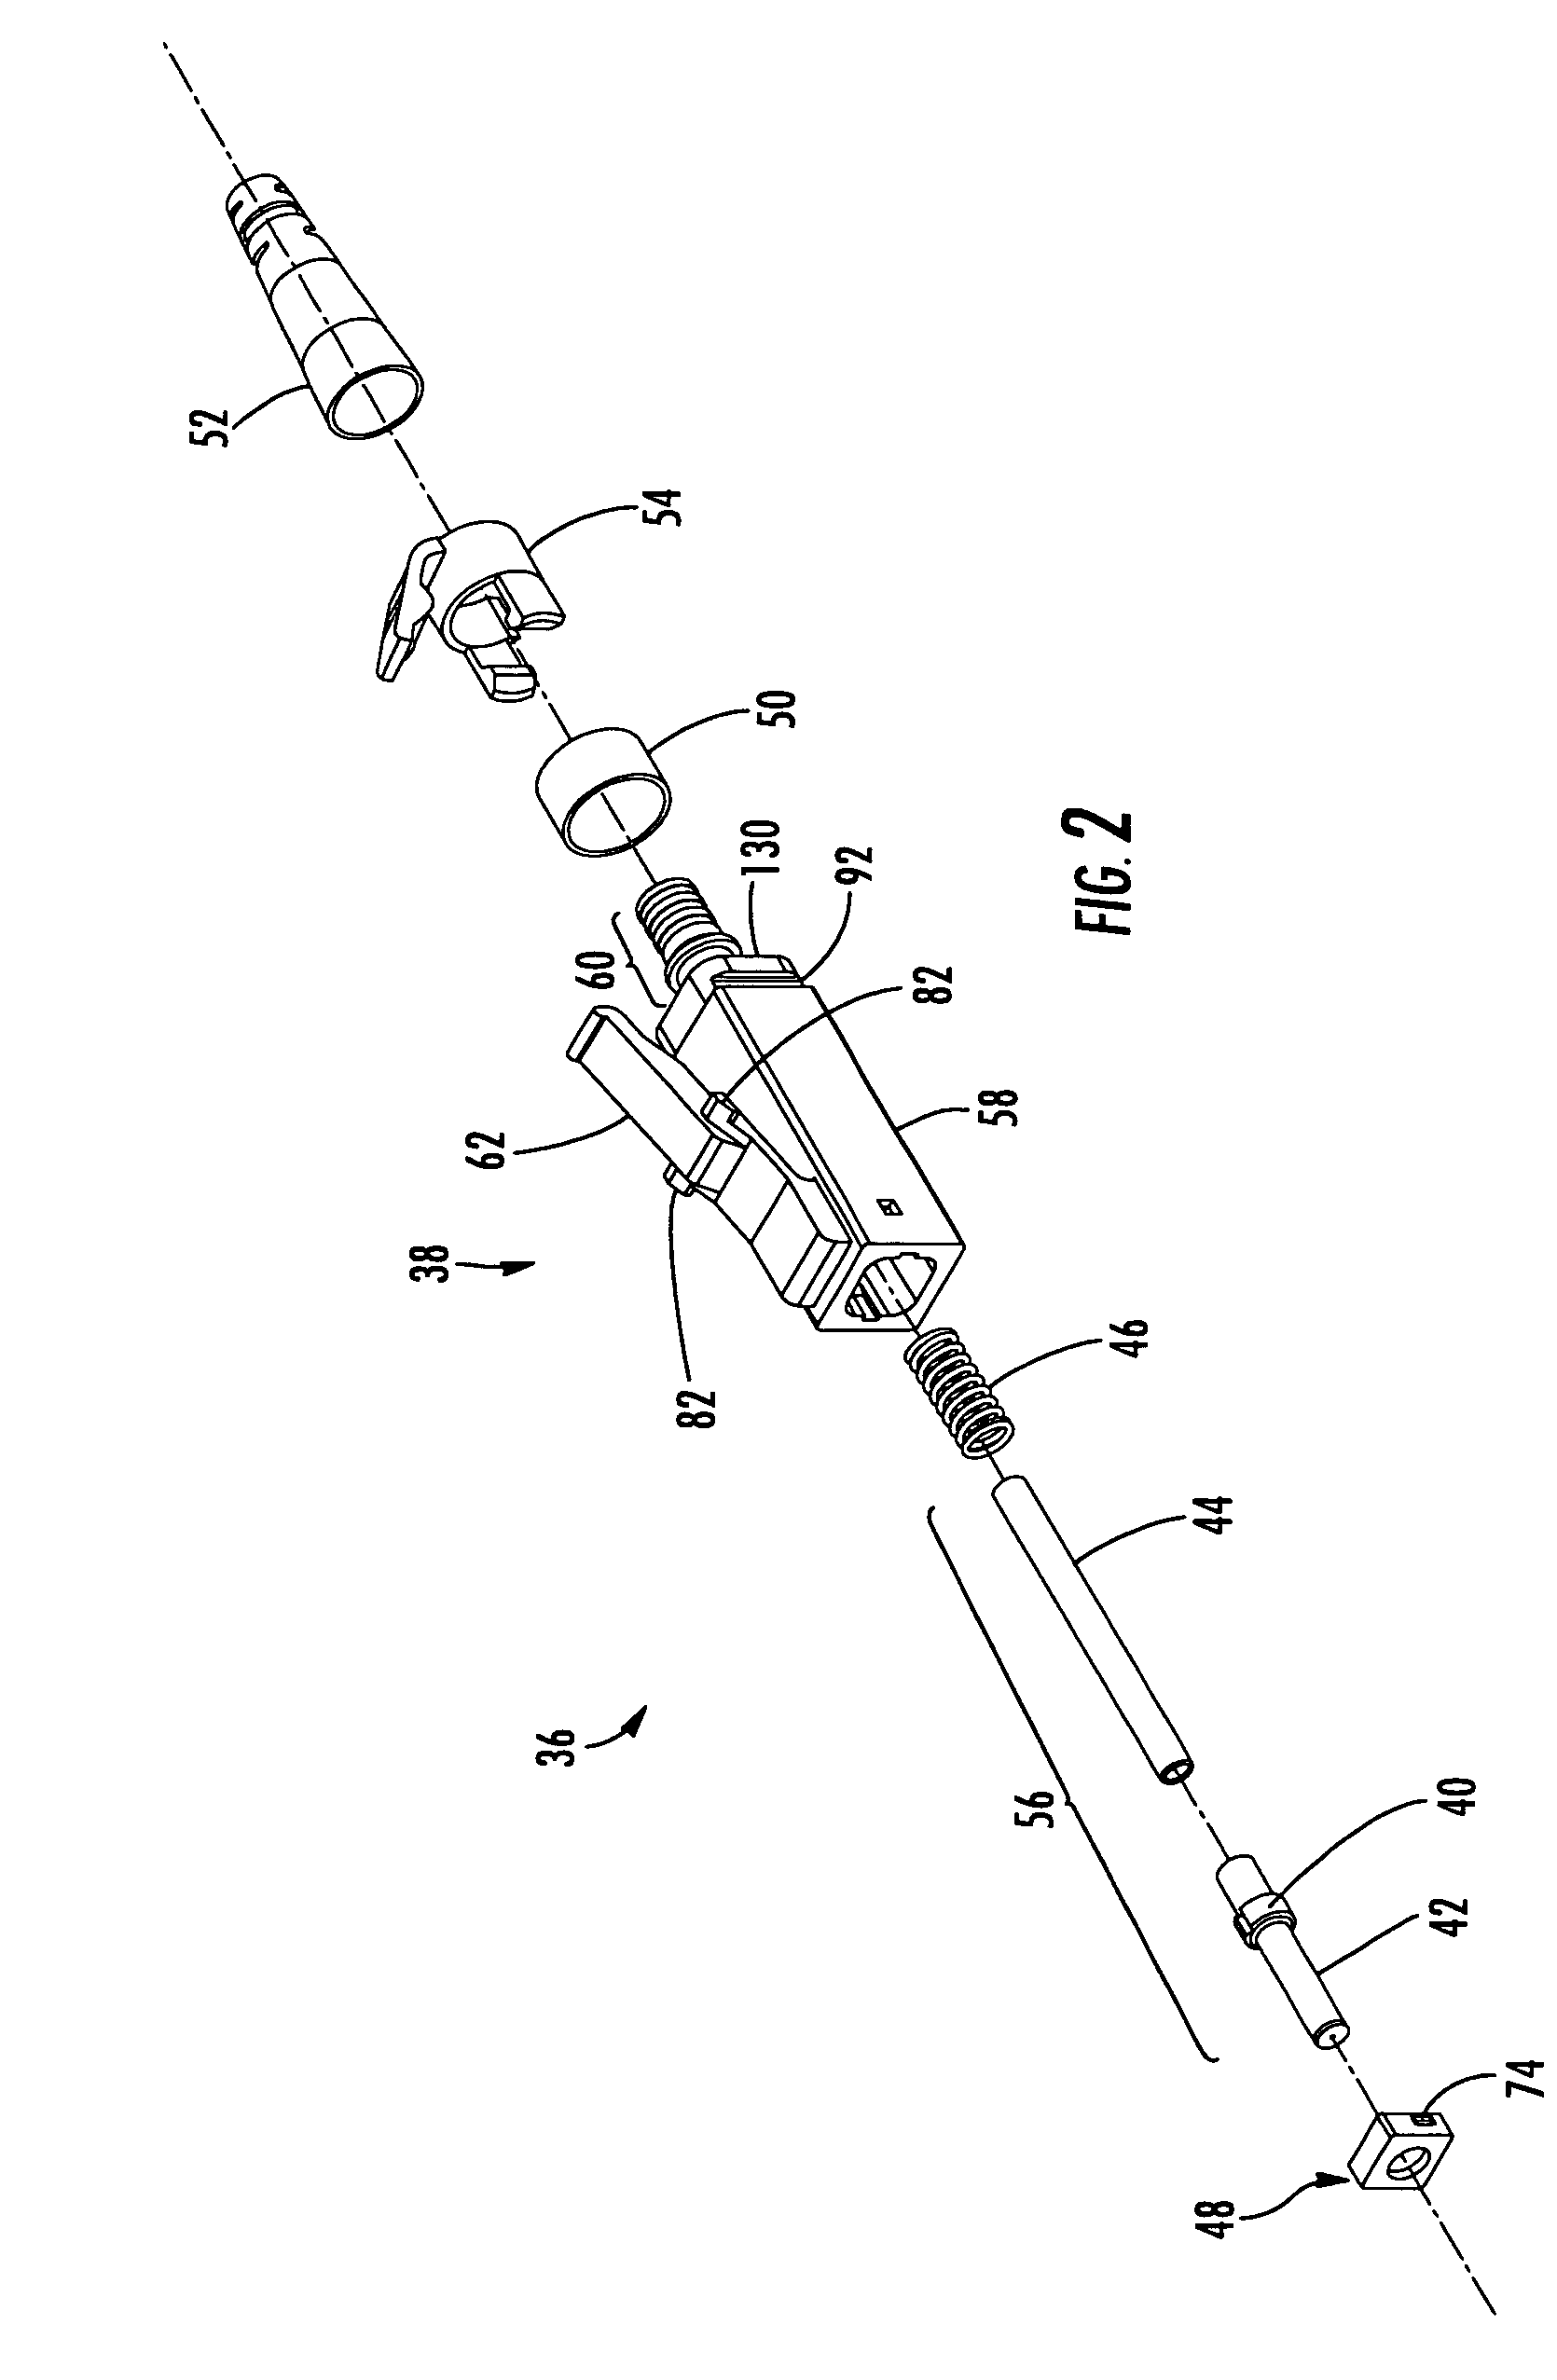 Optical fiber connector and method of assembly